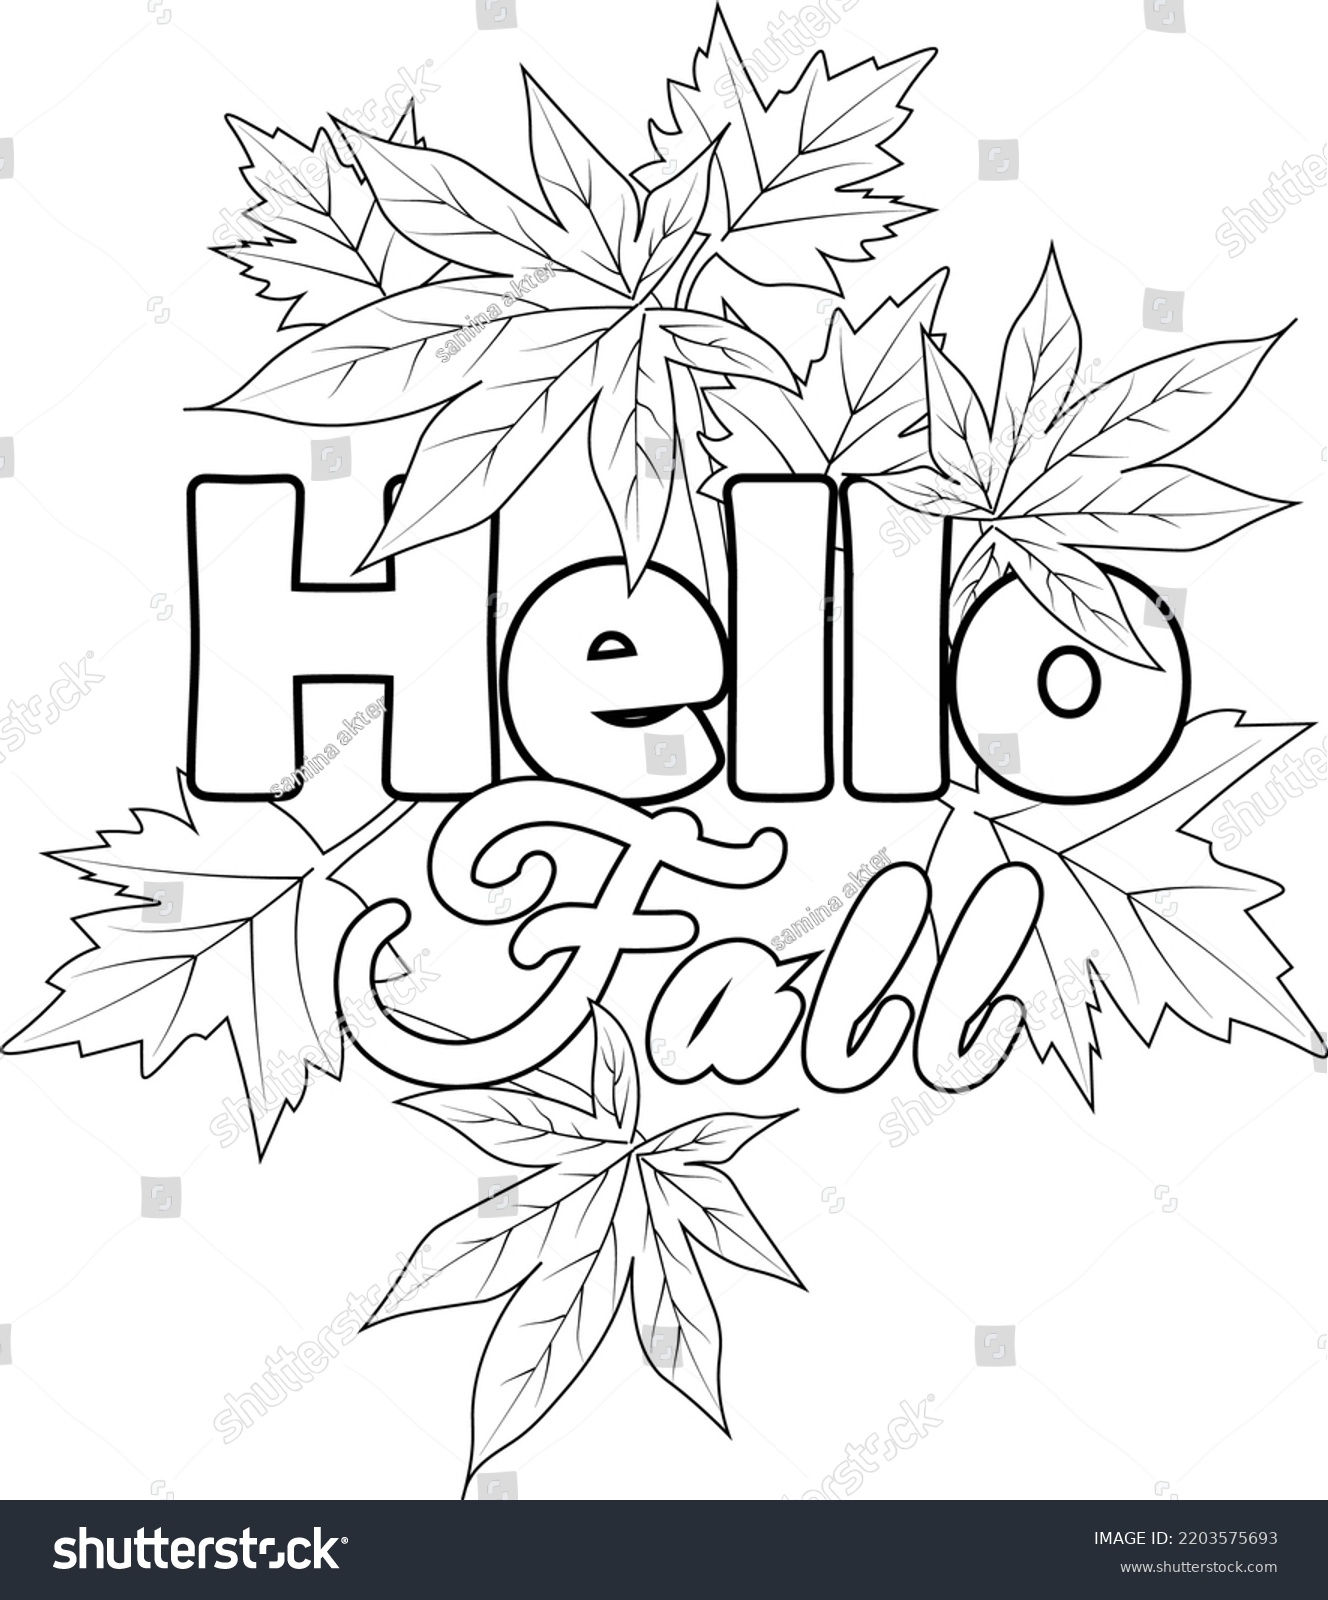 Hello fall coloring book page hand stock vector royalty free